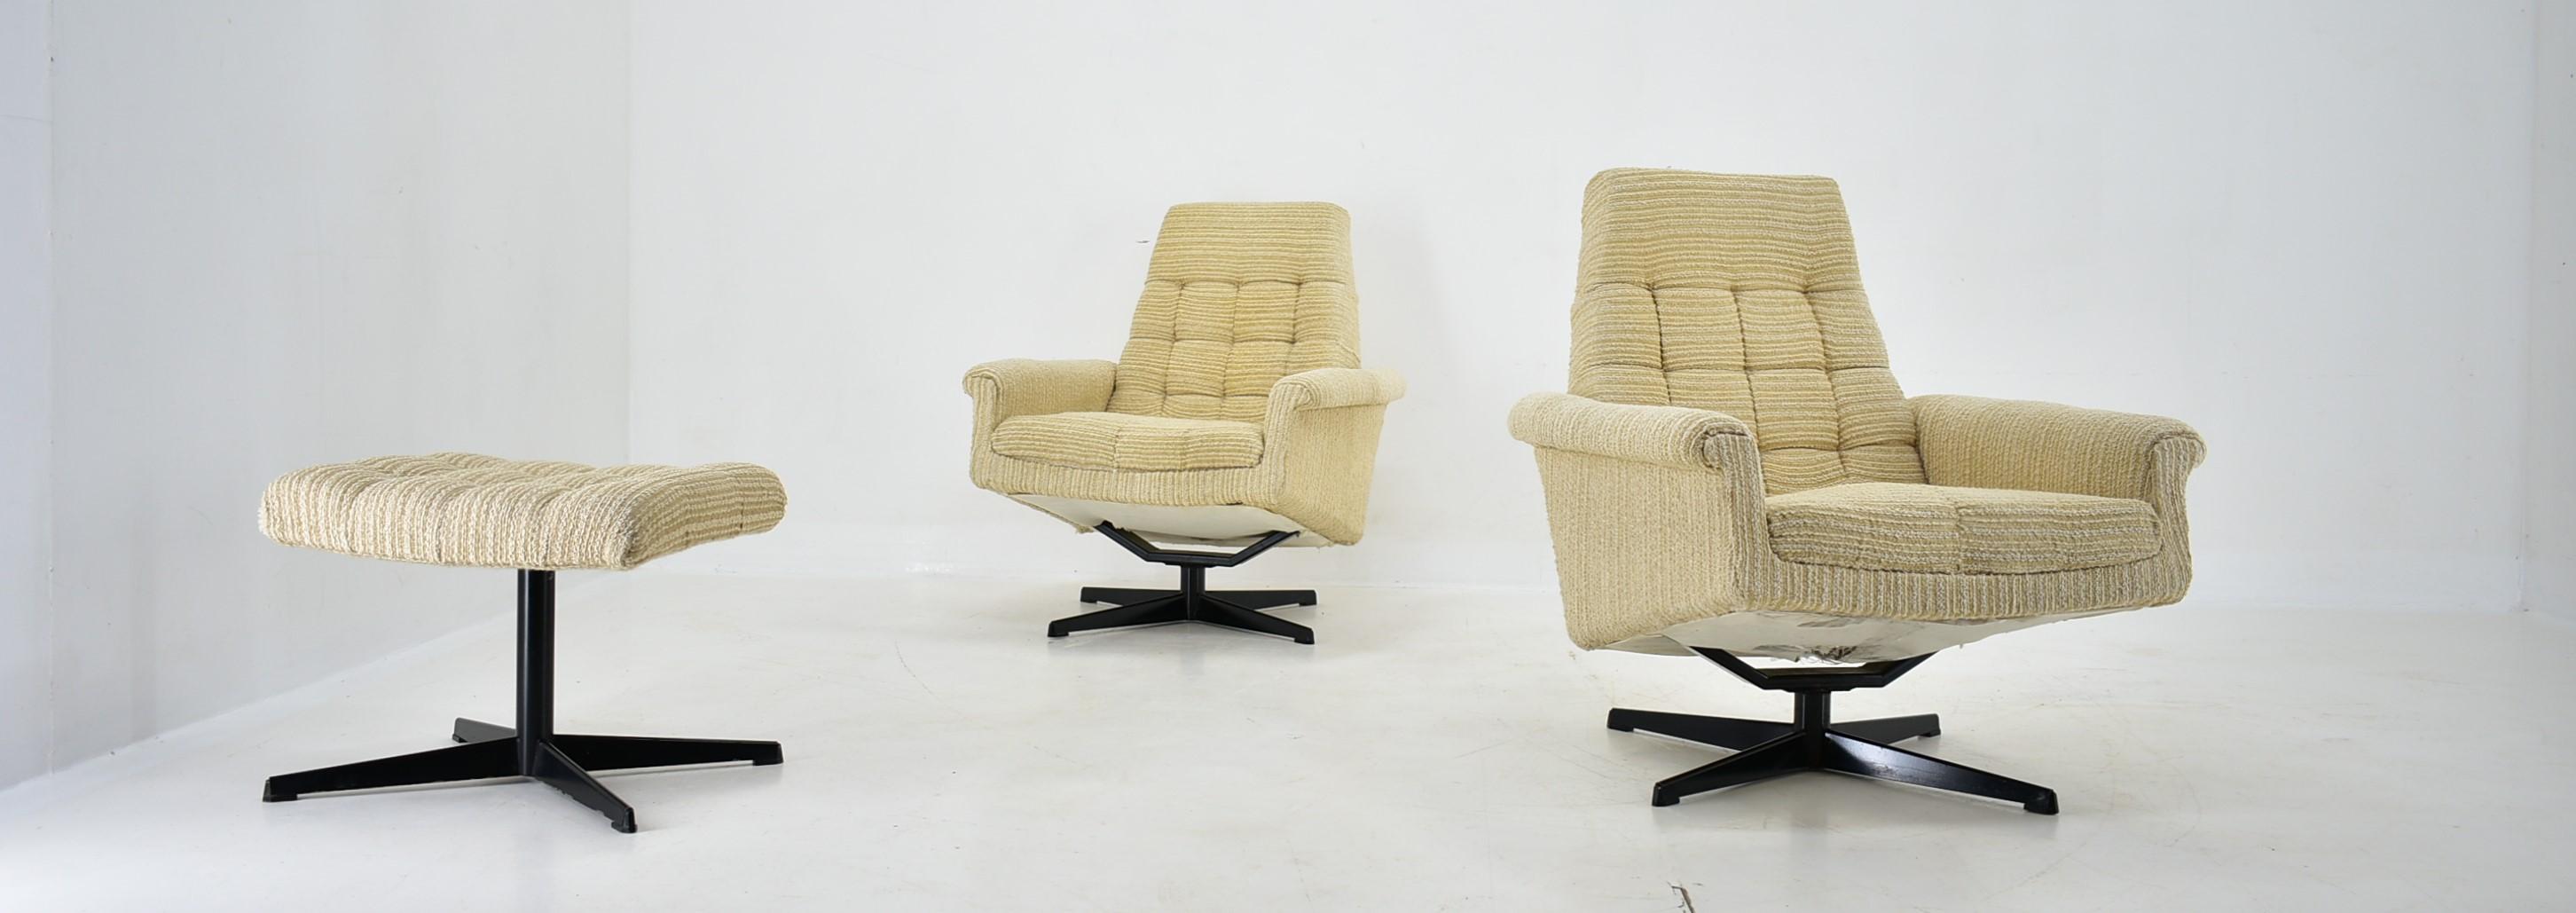 Pair of Armchairs, Tabouret by Morávek a Munzar, 1968s For Sale 12